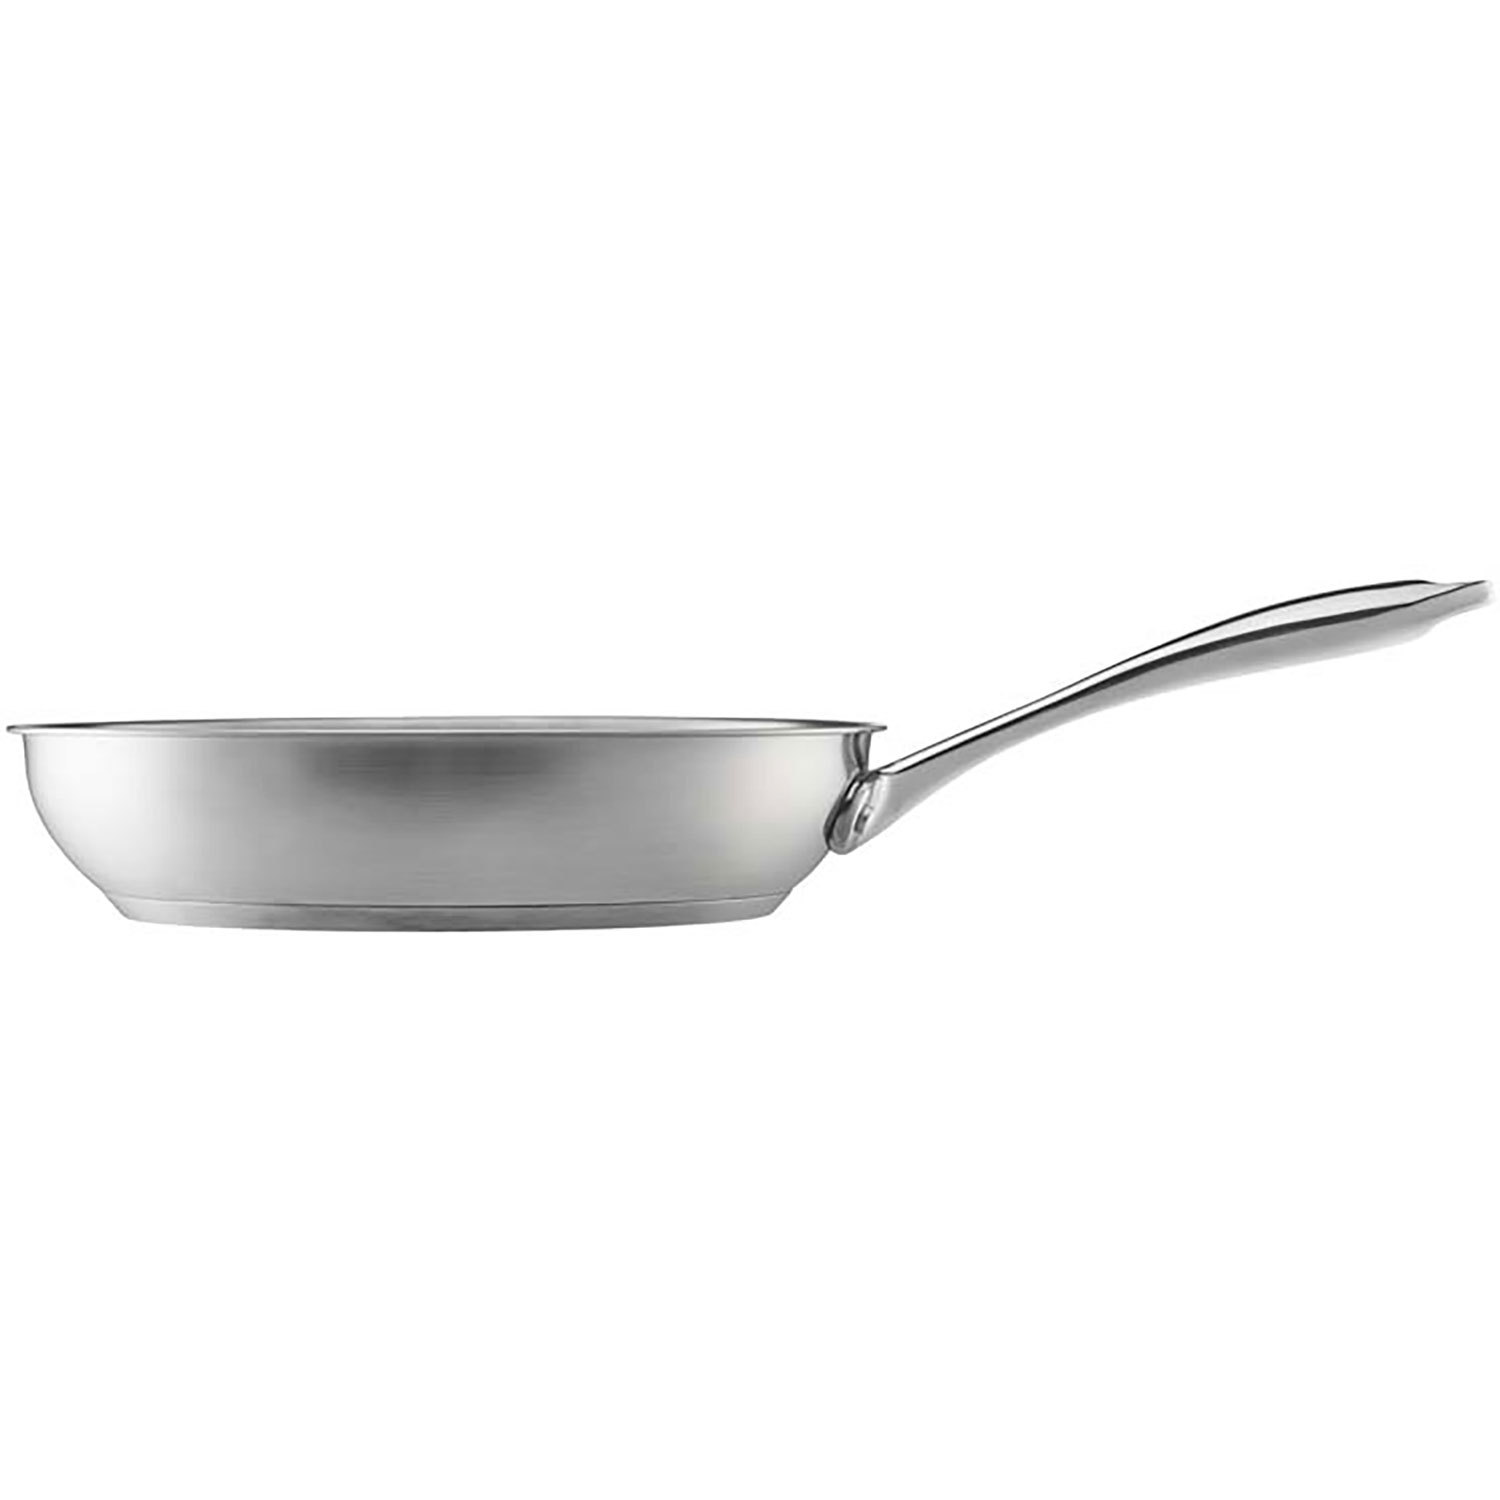 https://api-prod.royaldesign.se/api/products/image/2/heirol-steely-frying-pan-28-cm-in-stainless-steel-0